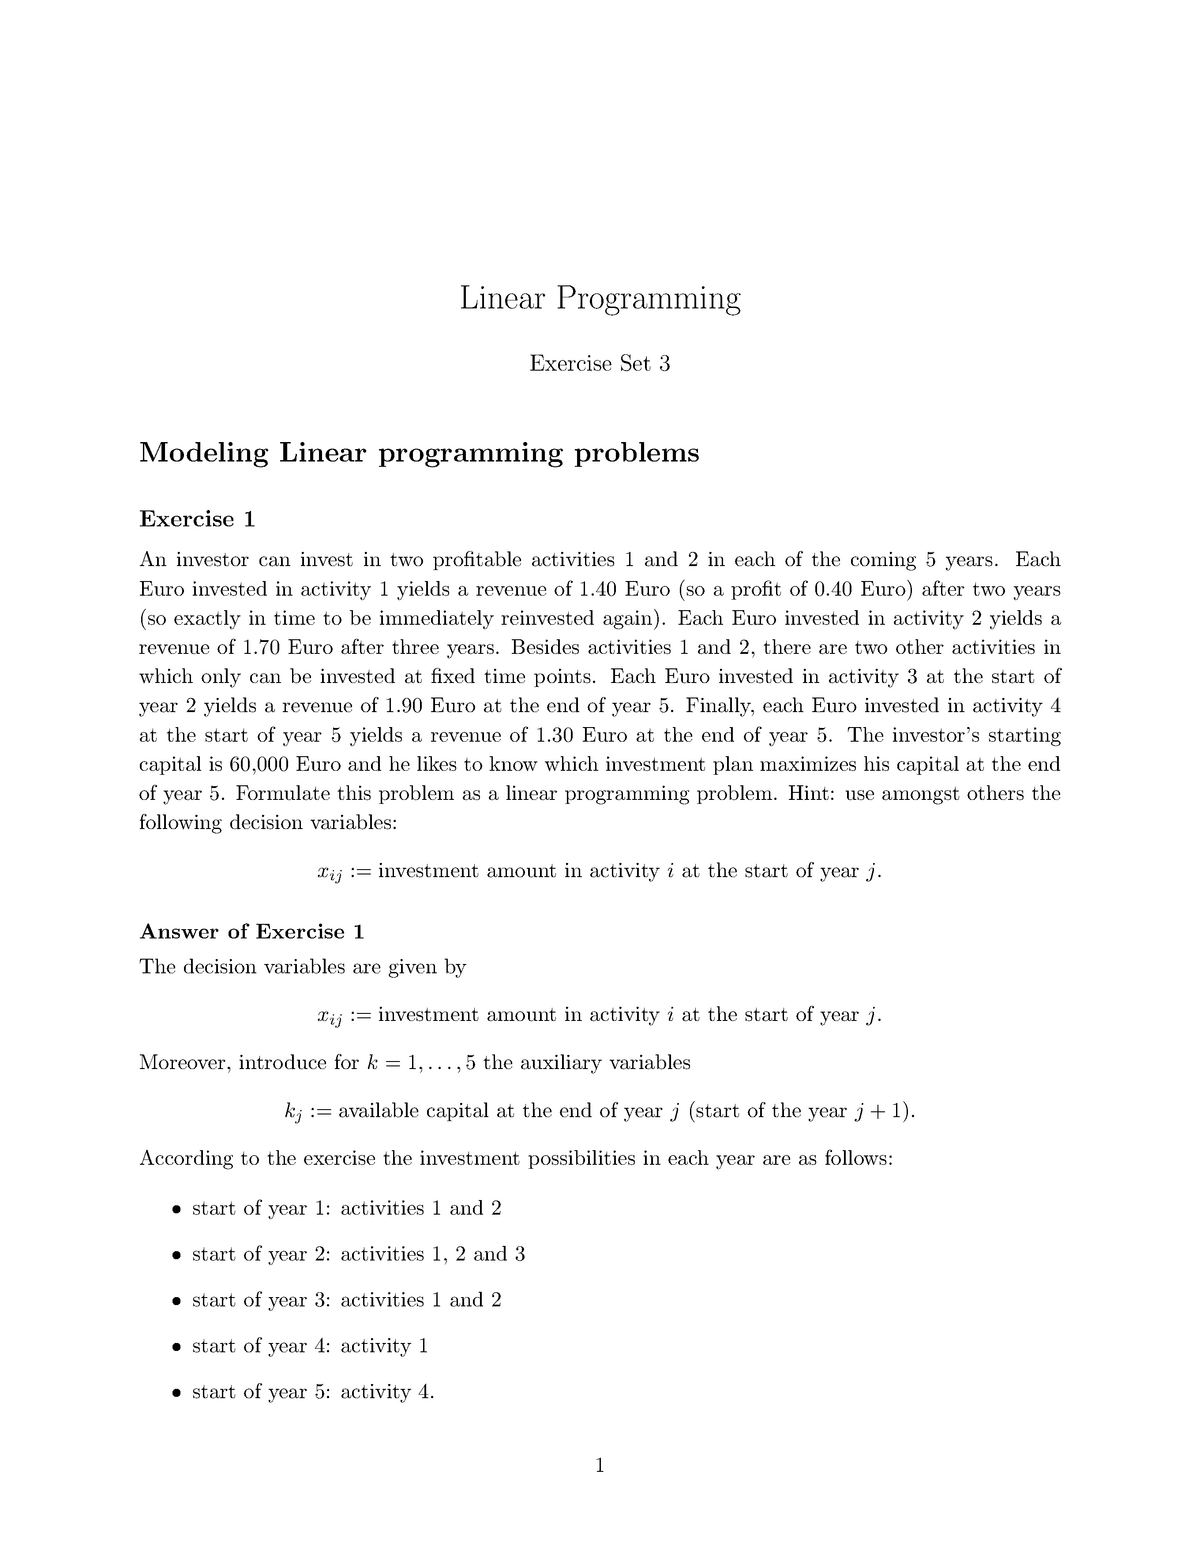 exercise-3-solutions-linear-programming-exercise-set-3-modeling